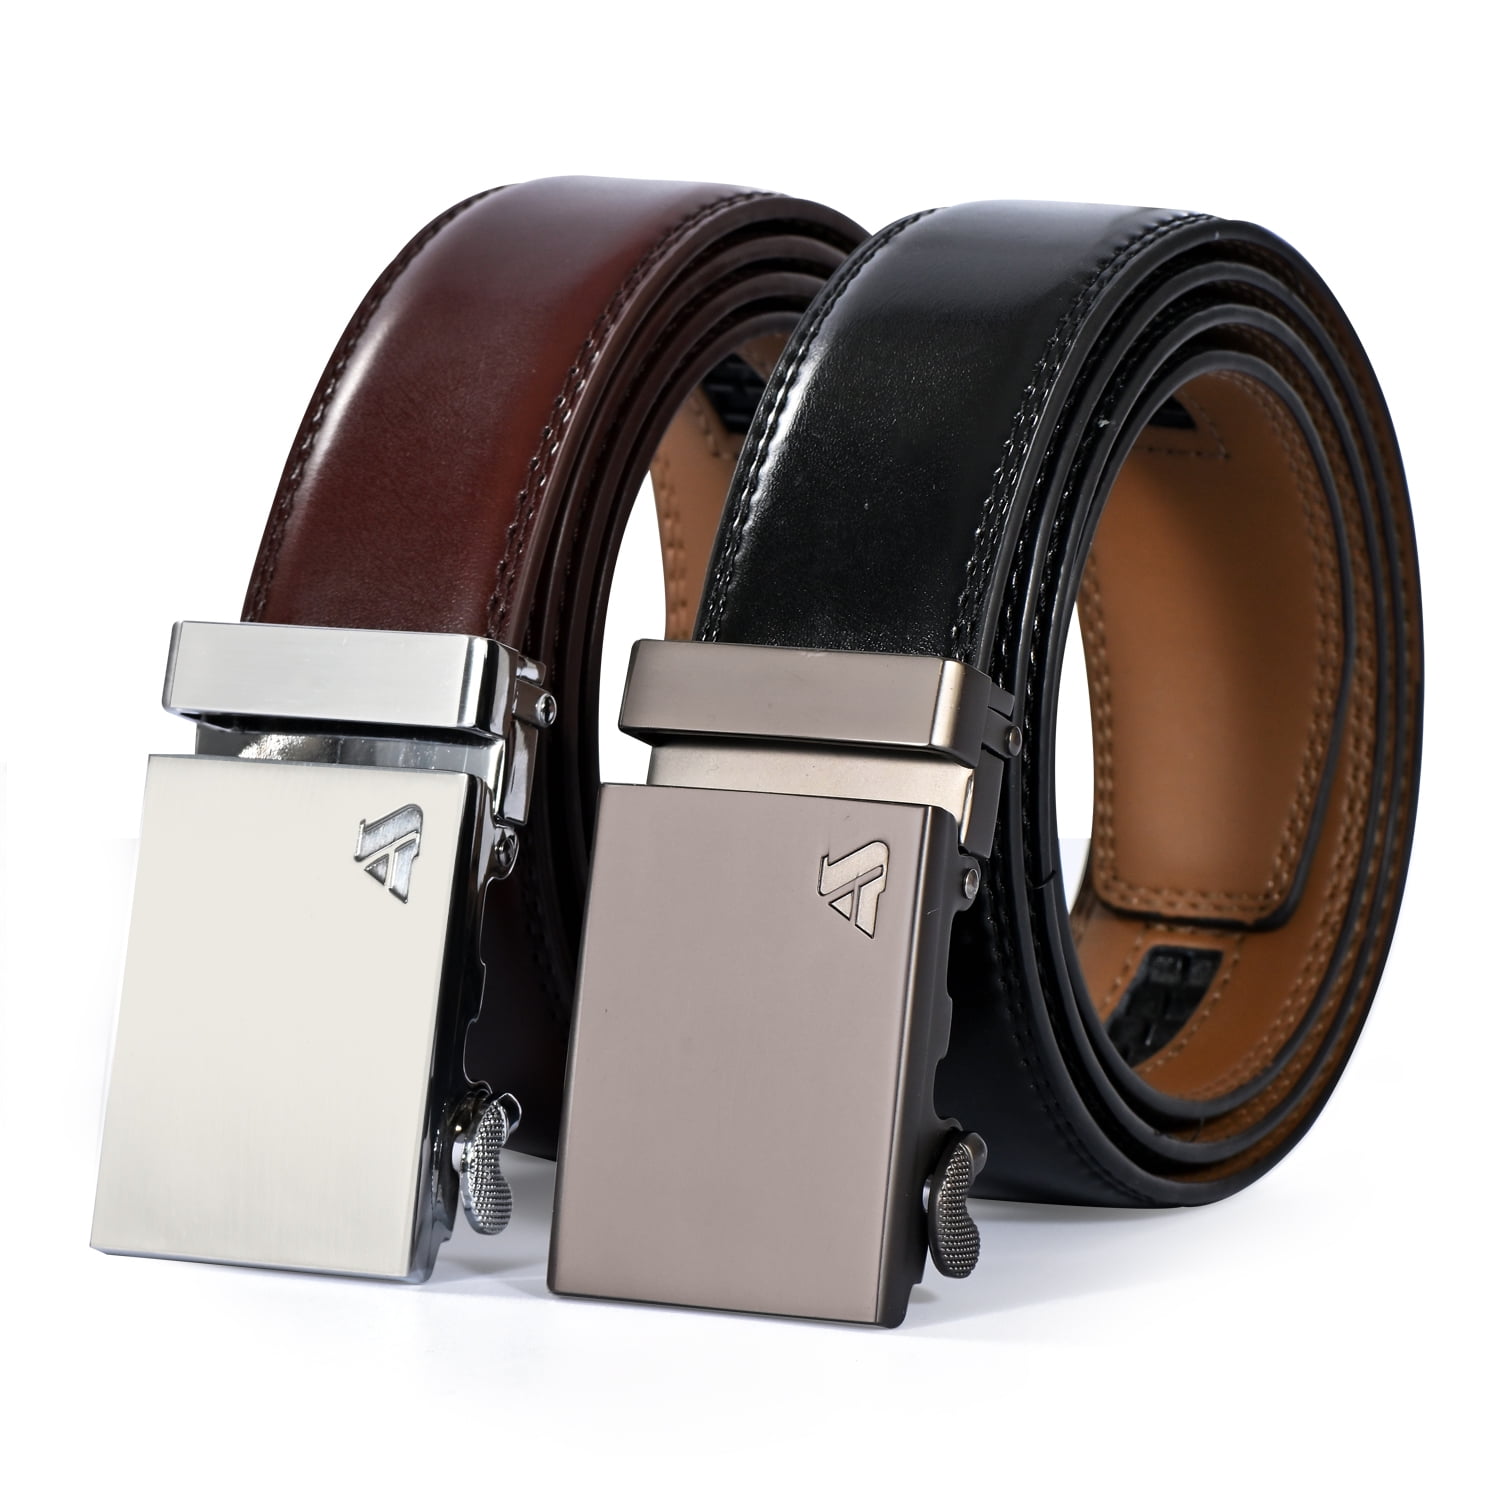 The Pure Blue MEN'S LEATHER BELT BEAUTIFULLY BOXED Automatic Sliding  Ratchet Buckle Belts 1.5'' (35mm) Wide Fully Adjustable to Fit Any Waist  Size up To 42''. Genuine Leather Strap (Black & Chrome) 